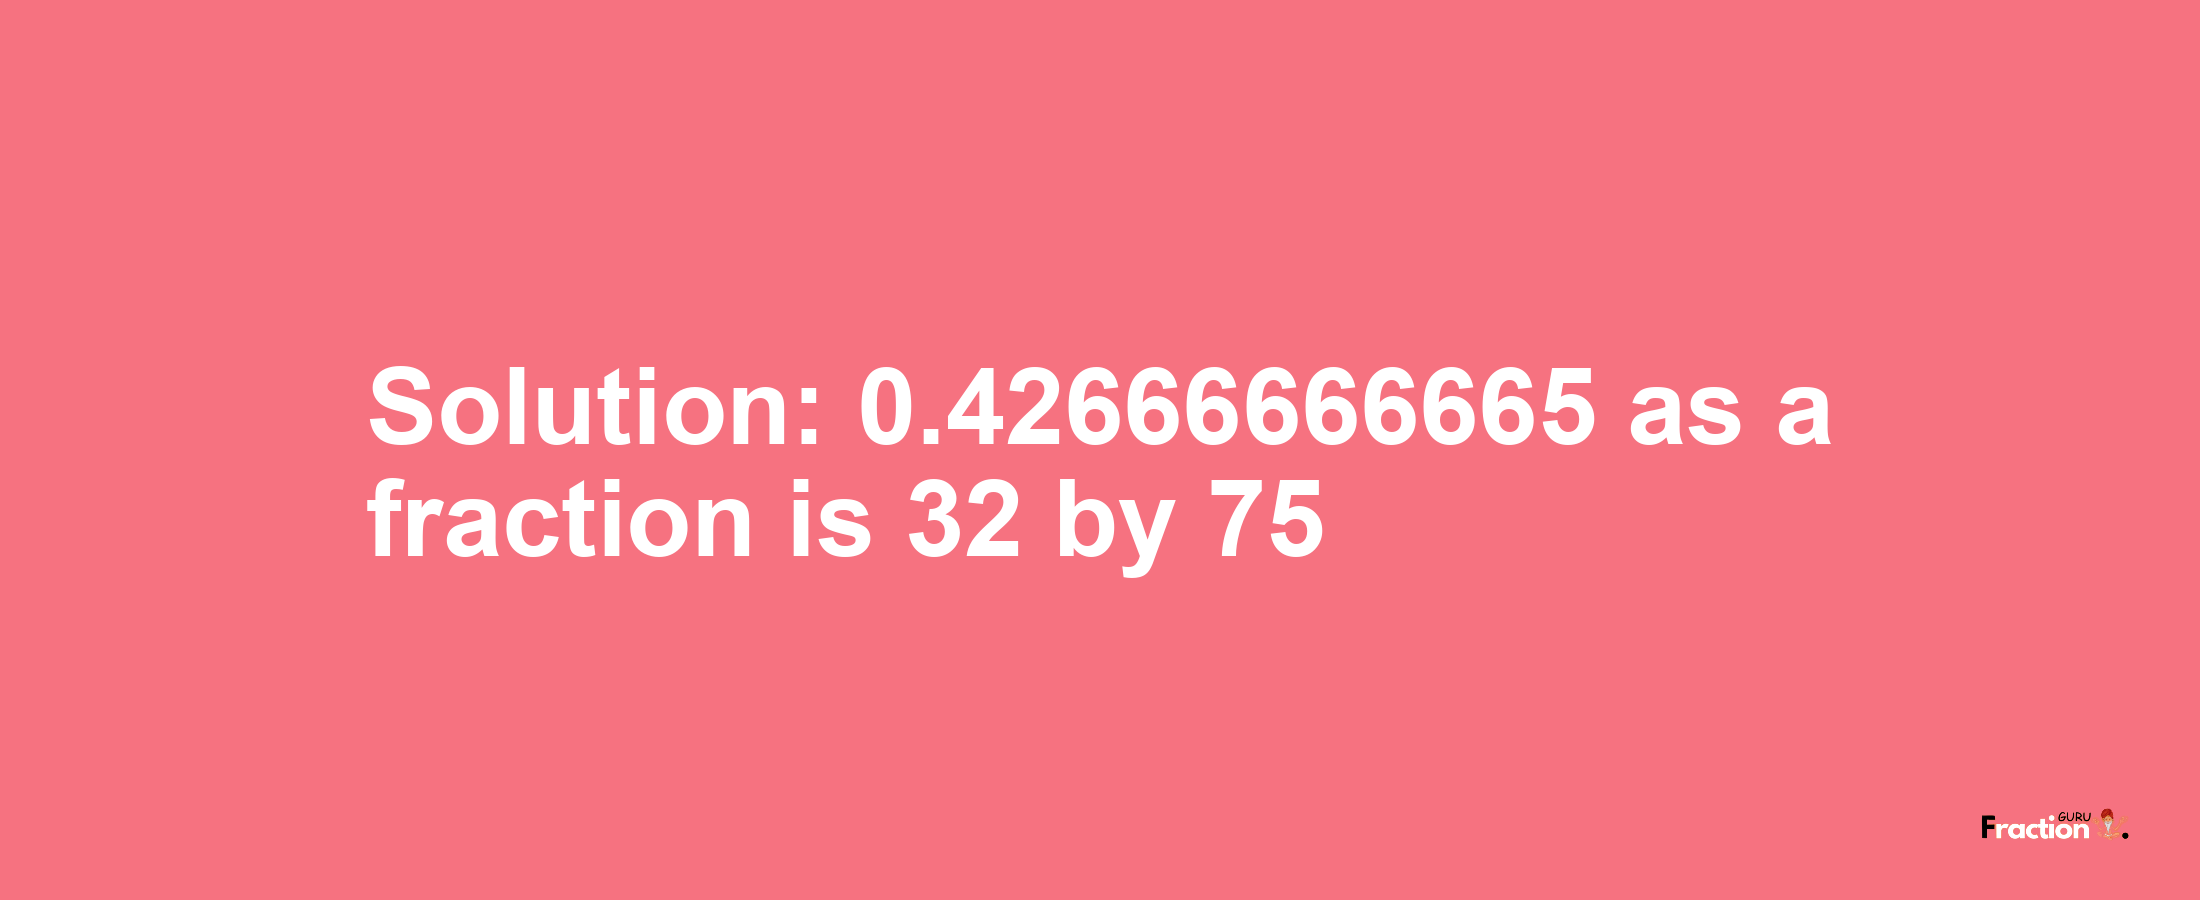 Solution:0.42666666665 as a fraction is 32/75